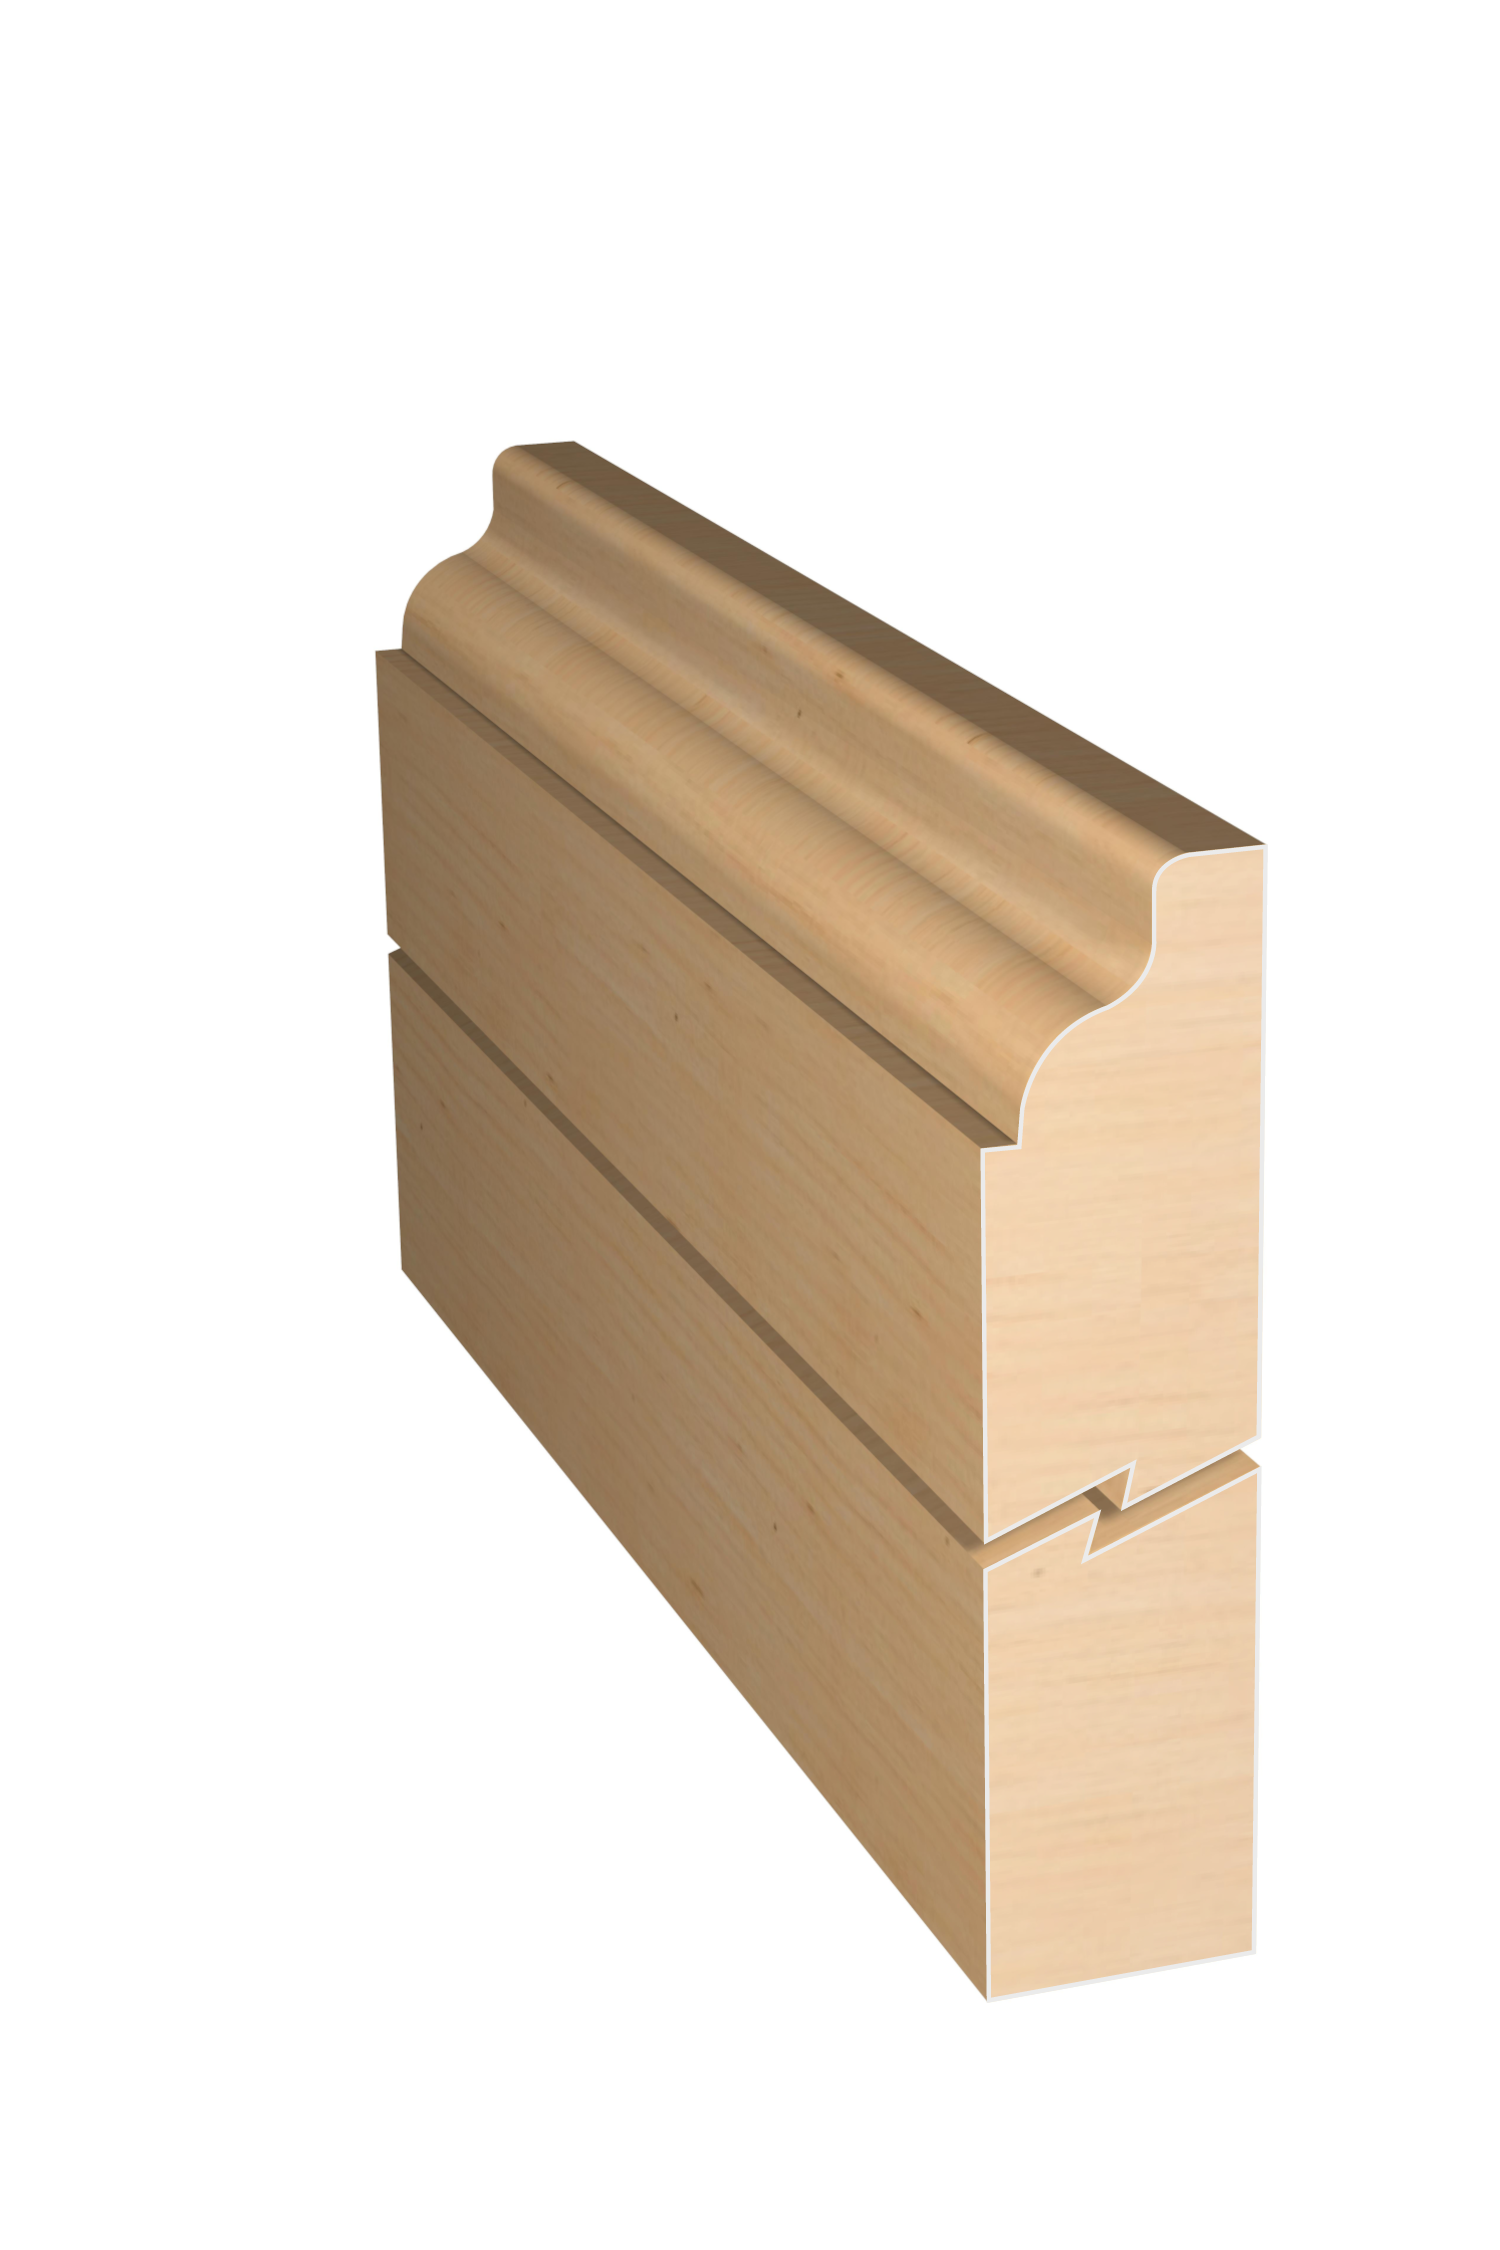 Three dimensional rendering of custom edge profile wood molding SKPL50 made by Public Lumber Company in Detroit.